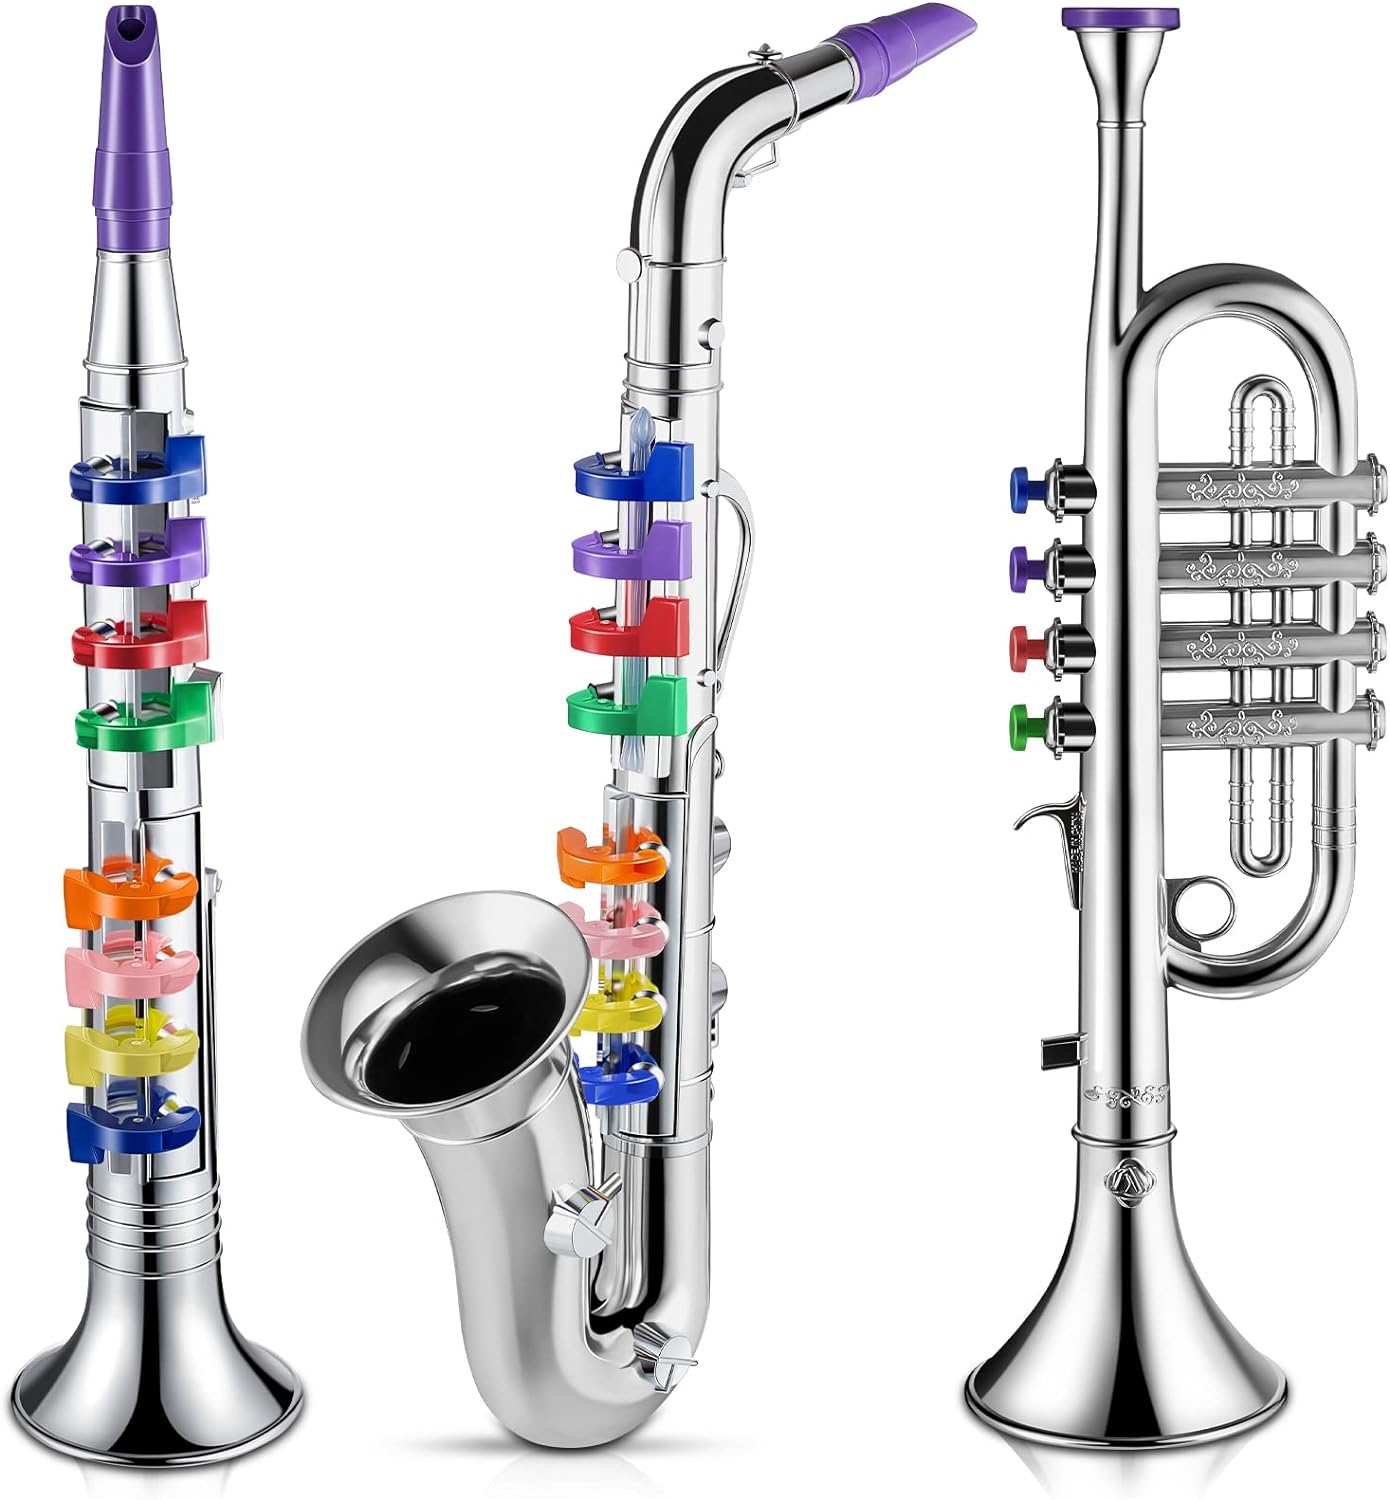 Set of 3 Saxophone for Kids Musical Instruments Toy Saxophone Toy Trumpet and Toy Clarinet with 8 Colored Coded Keys Teaching Songs for Toddlers Children (Silver) : Toys Games